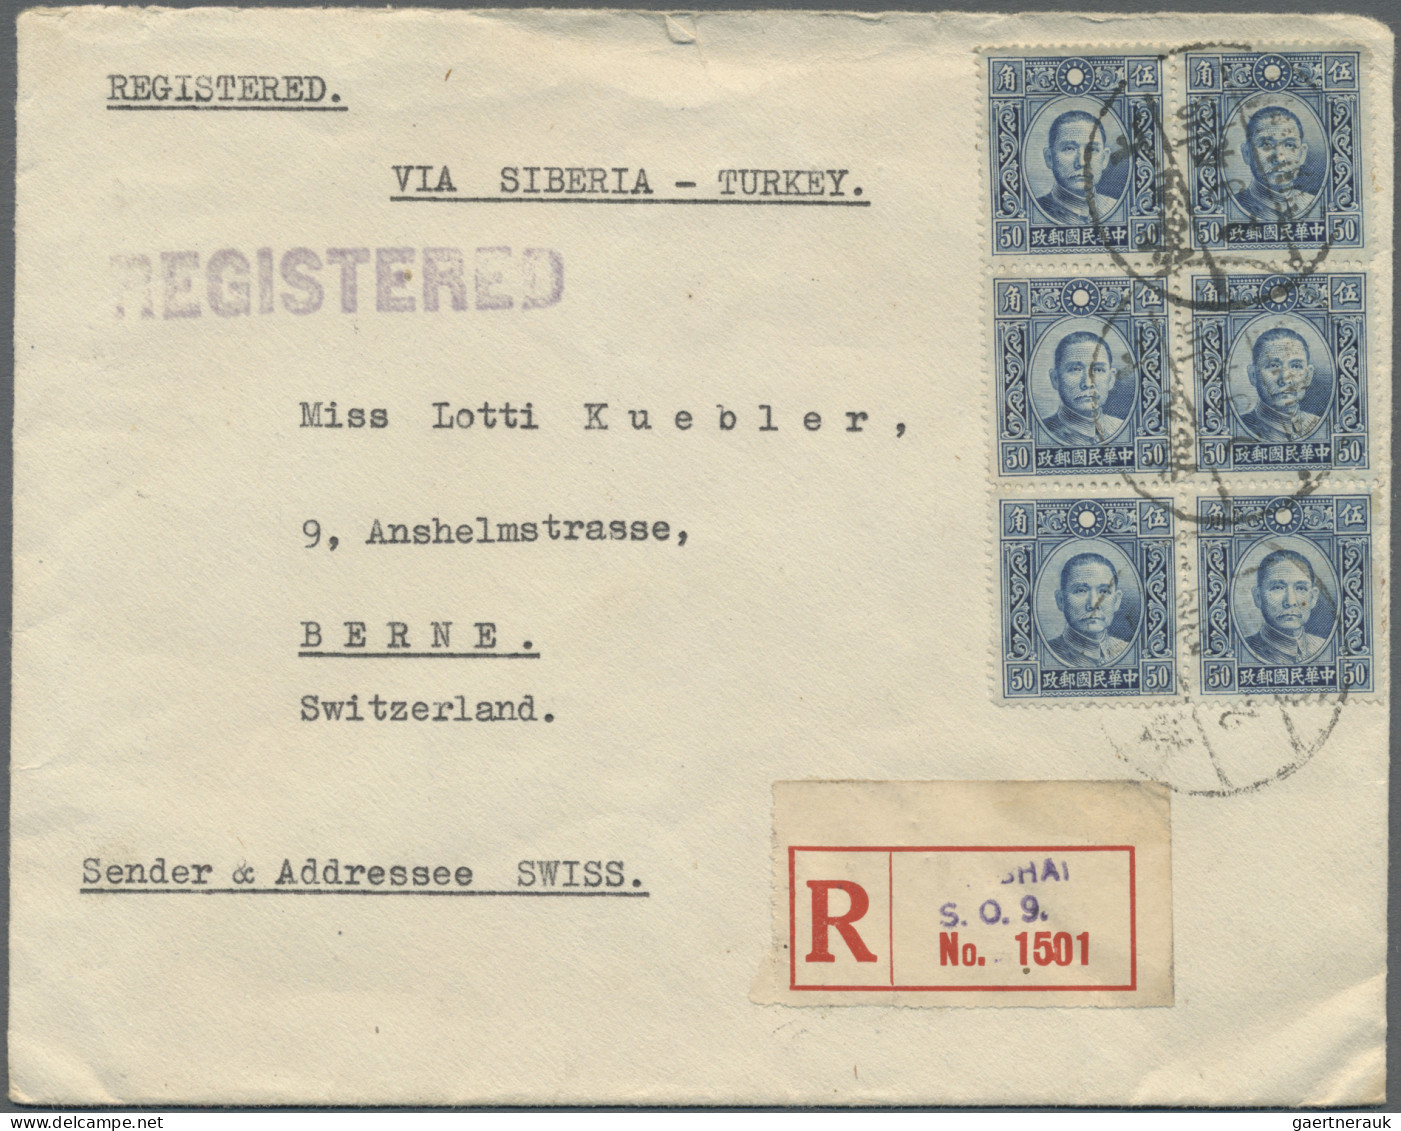 China: 1913/1946, covers/used ppc (13) inc. junk 4 C. used bisected "SHAMEEN" 19